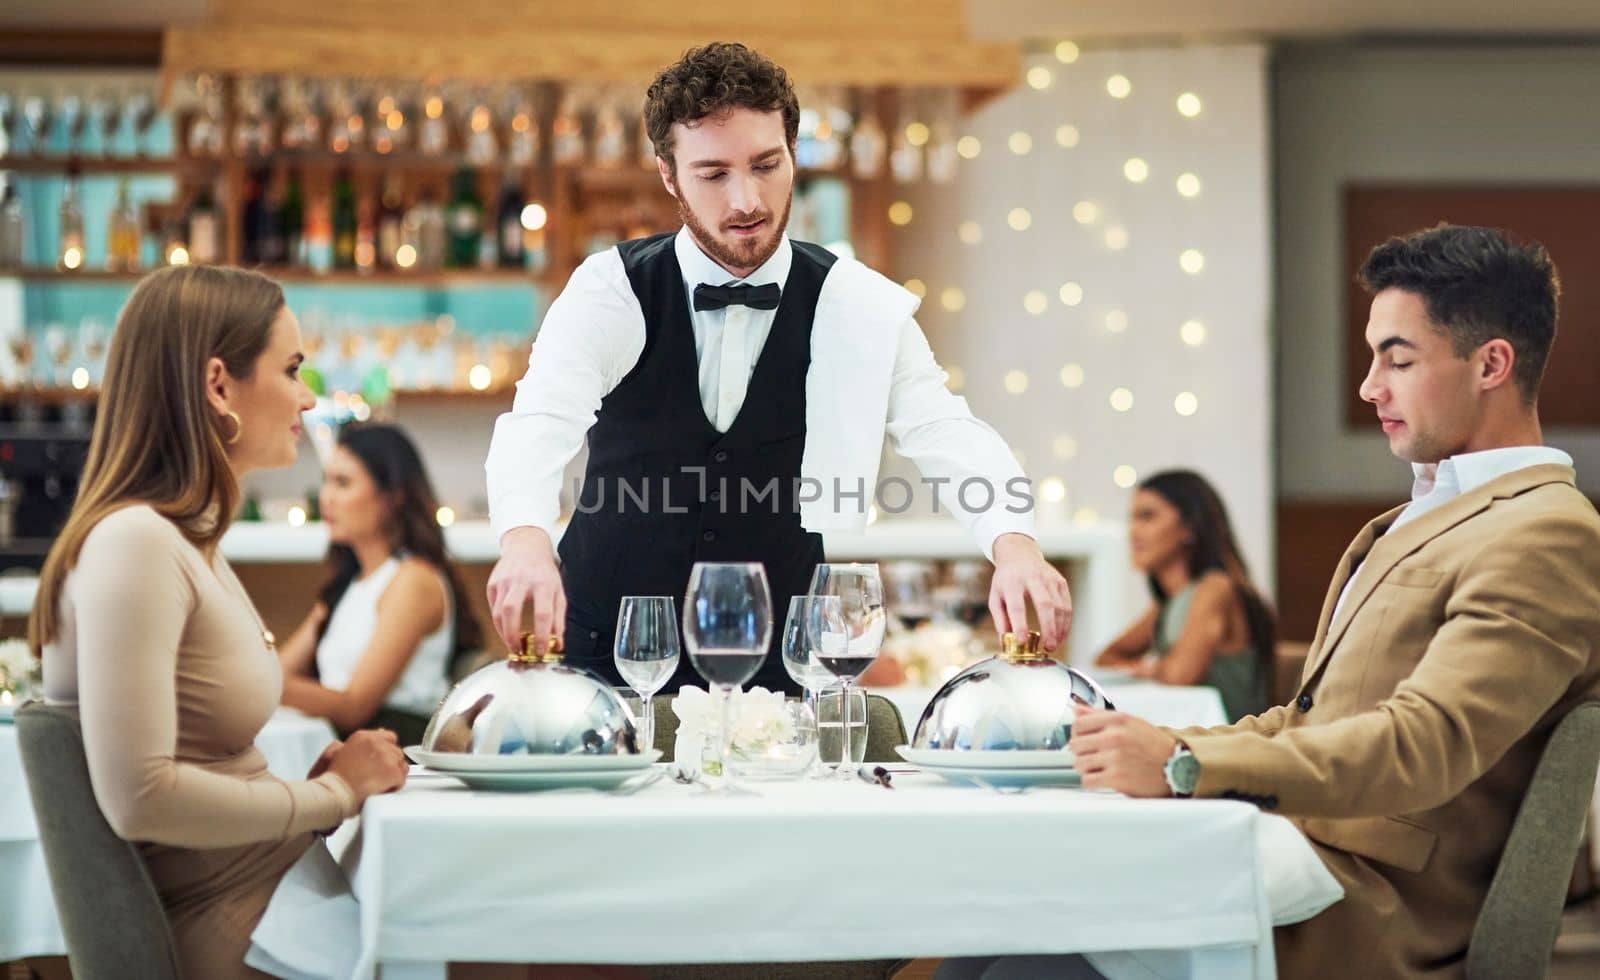 Restaurant, food and valentines day with a couple at a table in celebration of love, romance or marriage together. Wine, night or luxury fine dining with a man and woman celebrating their anniversary.